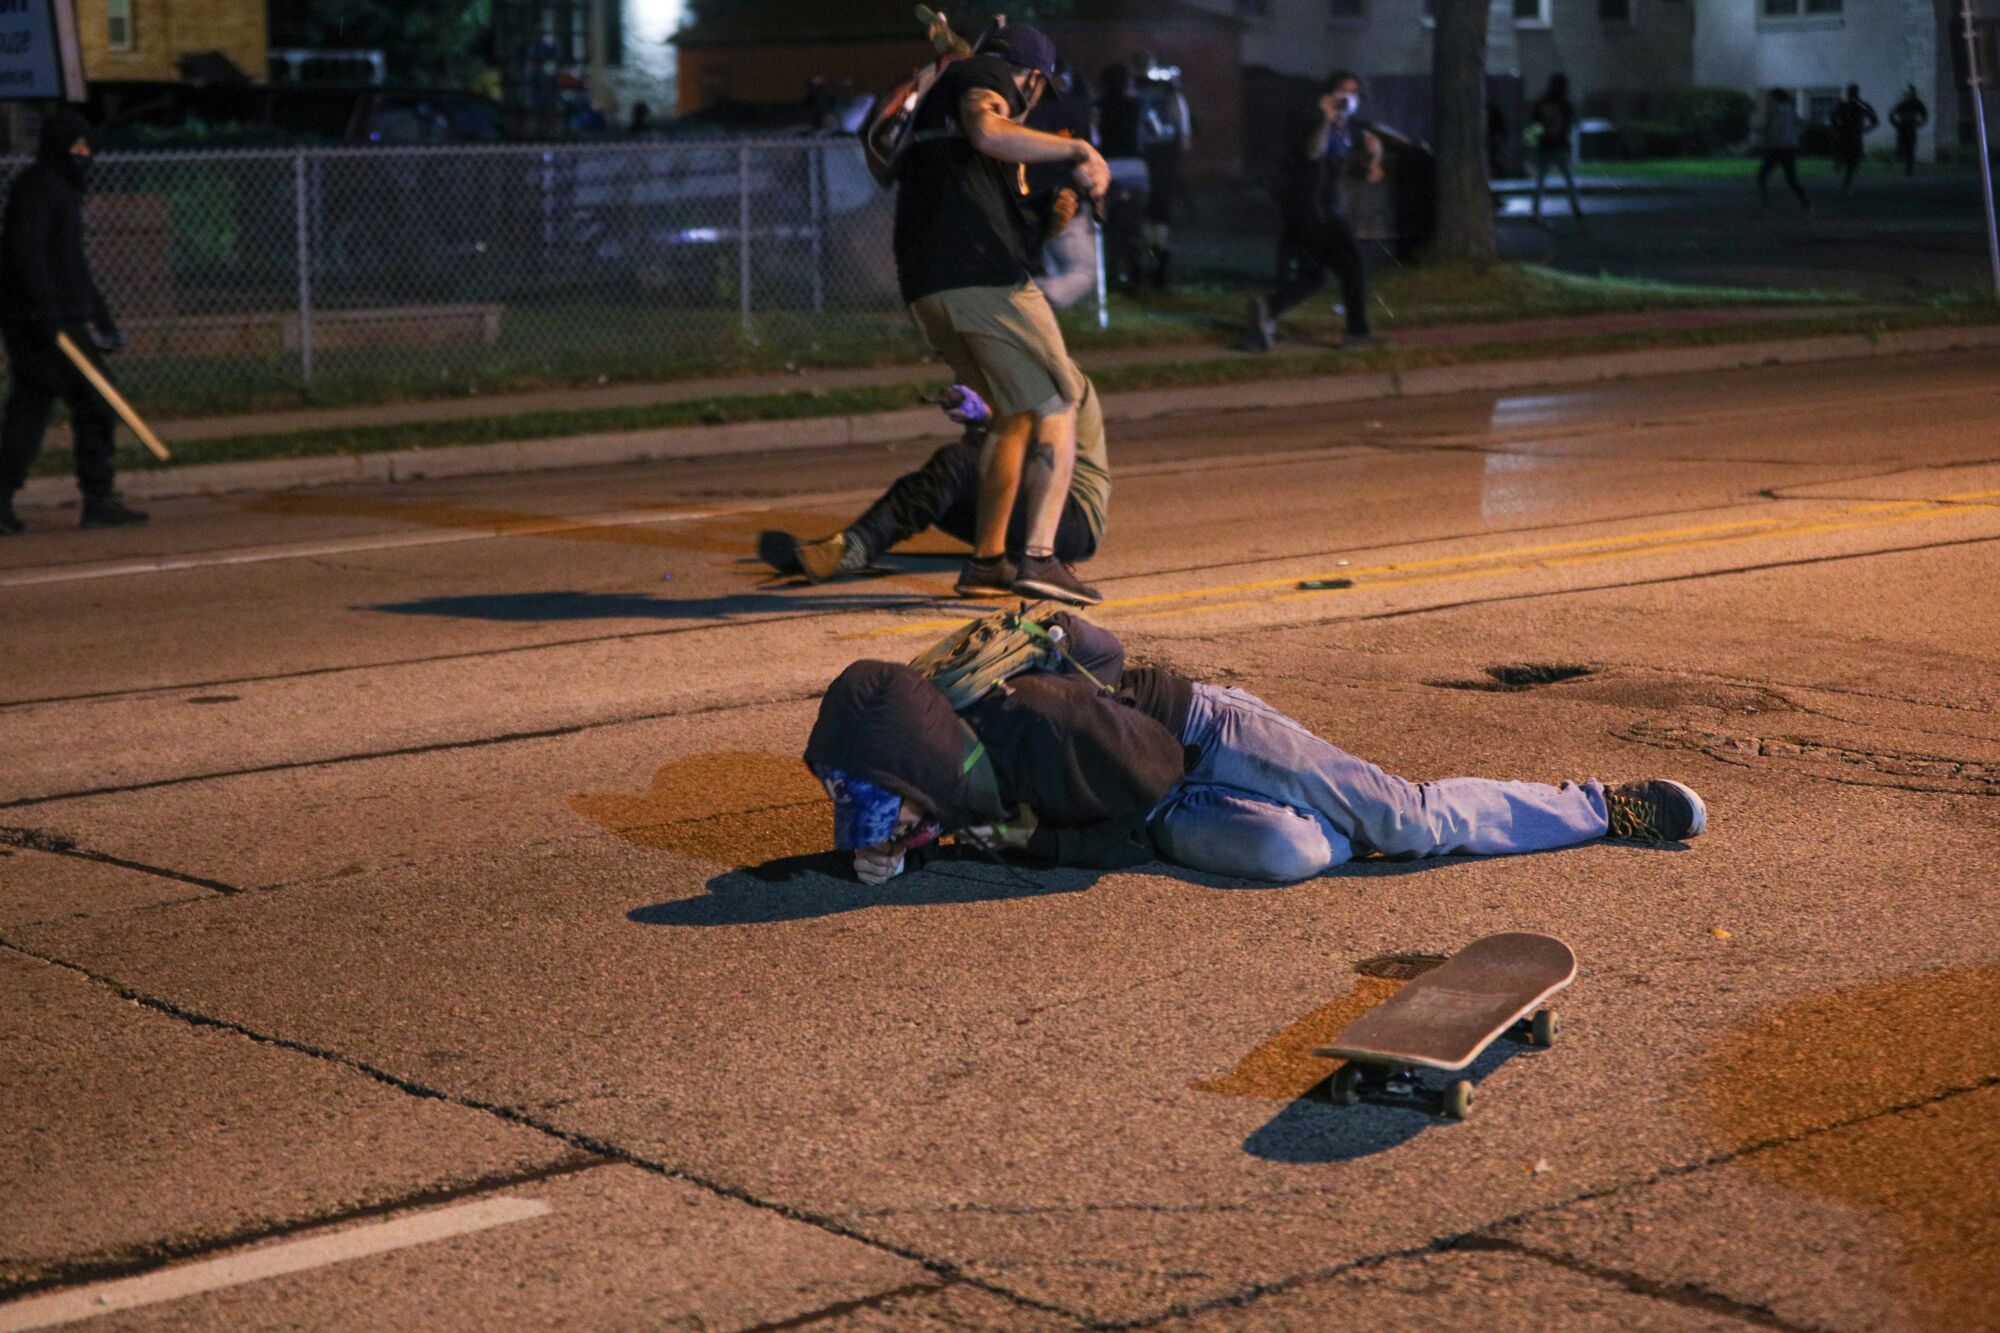 A man was shot in the chest during clashes between protesters and armed civilians in Kenosha.